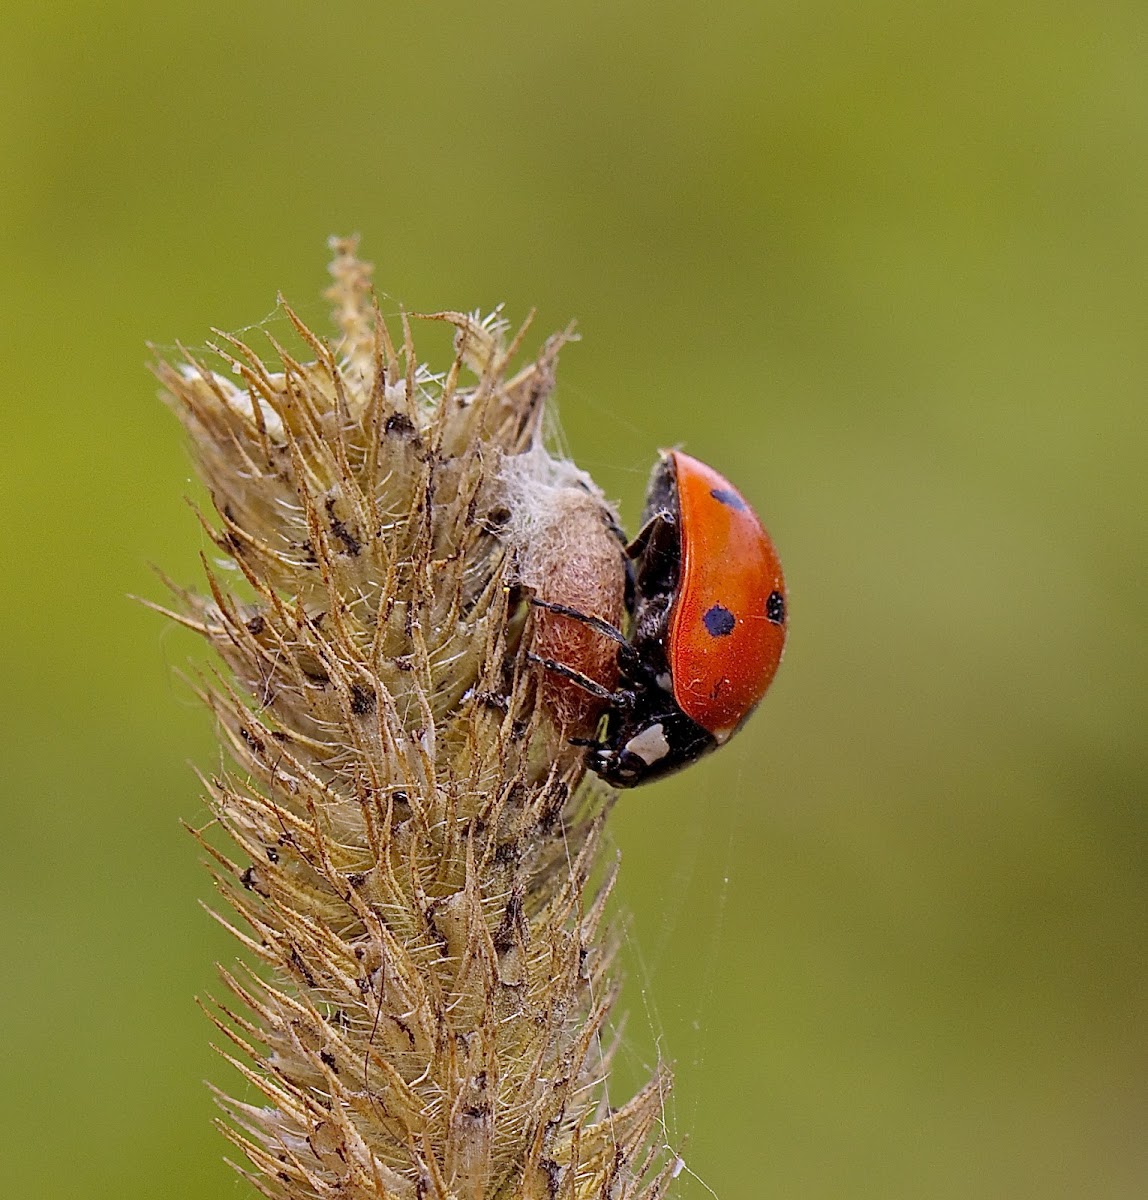 Zombie Seven-spotted Ladybug and Parasitic Wasp Cocoon